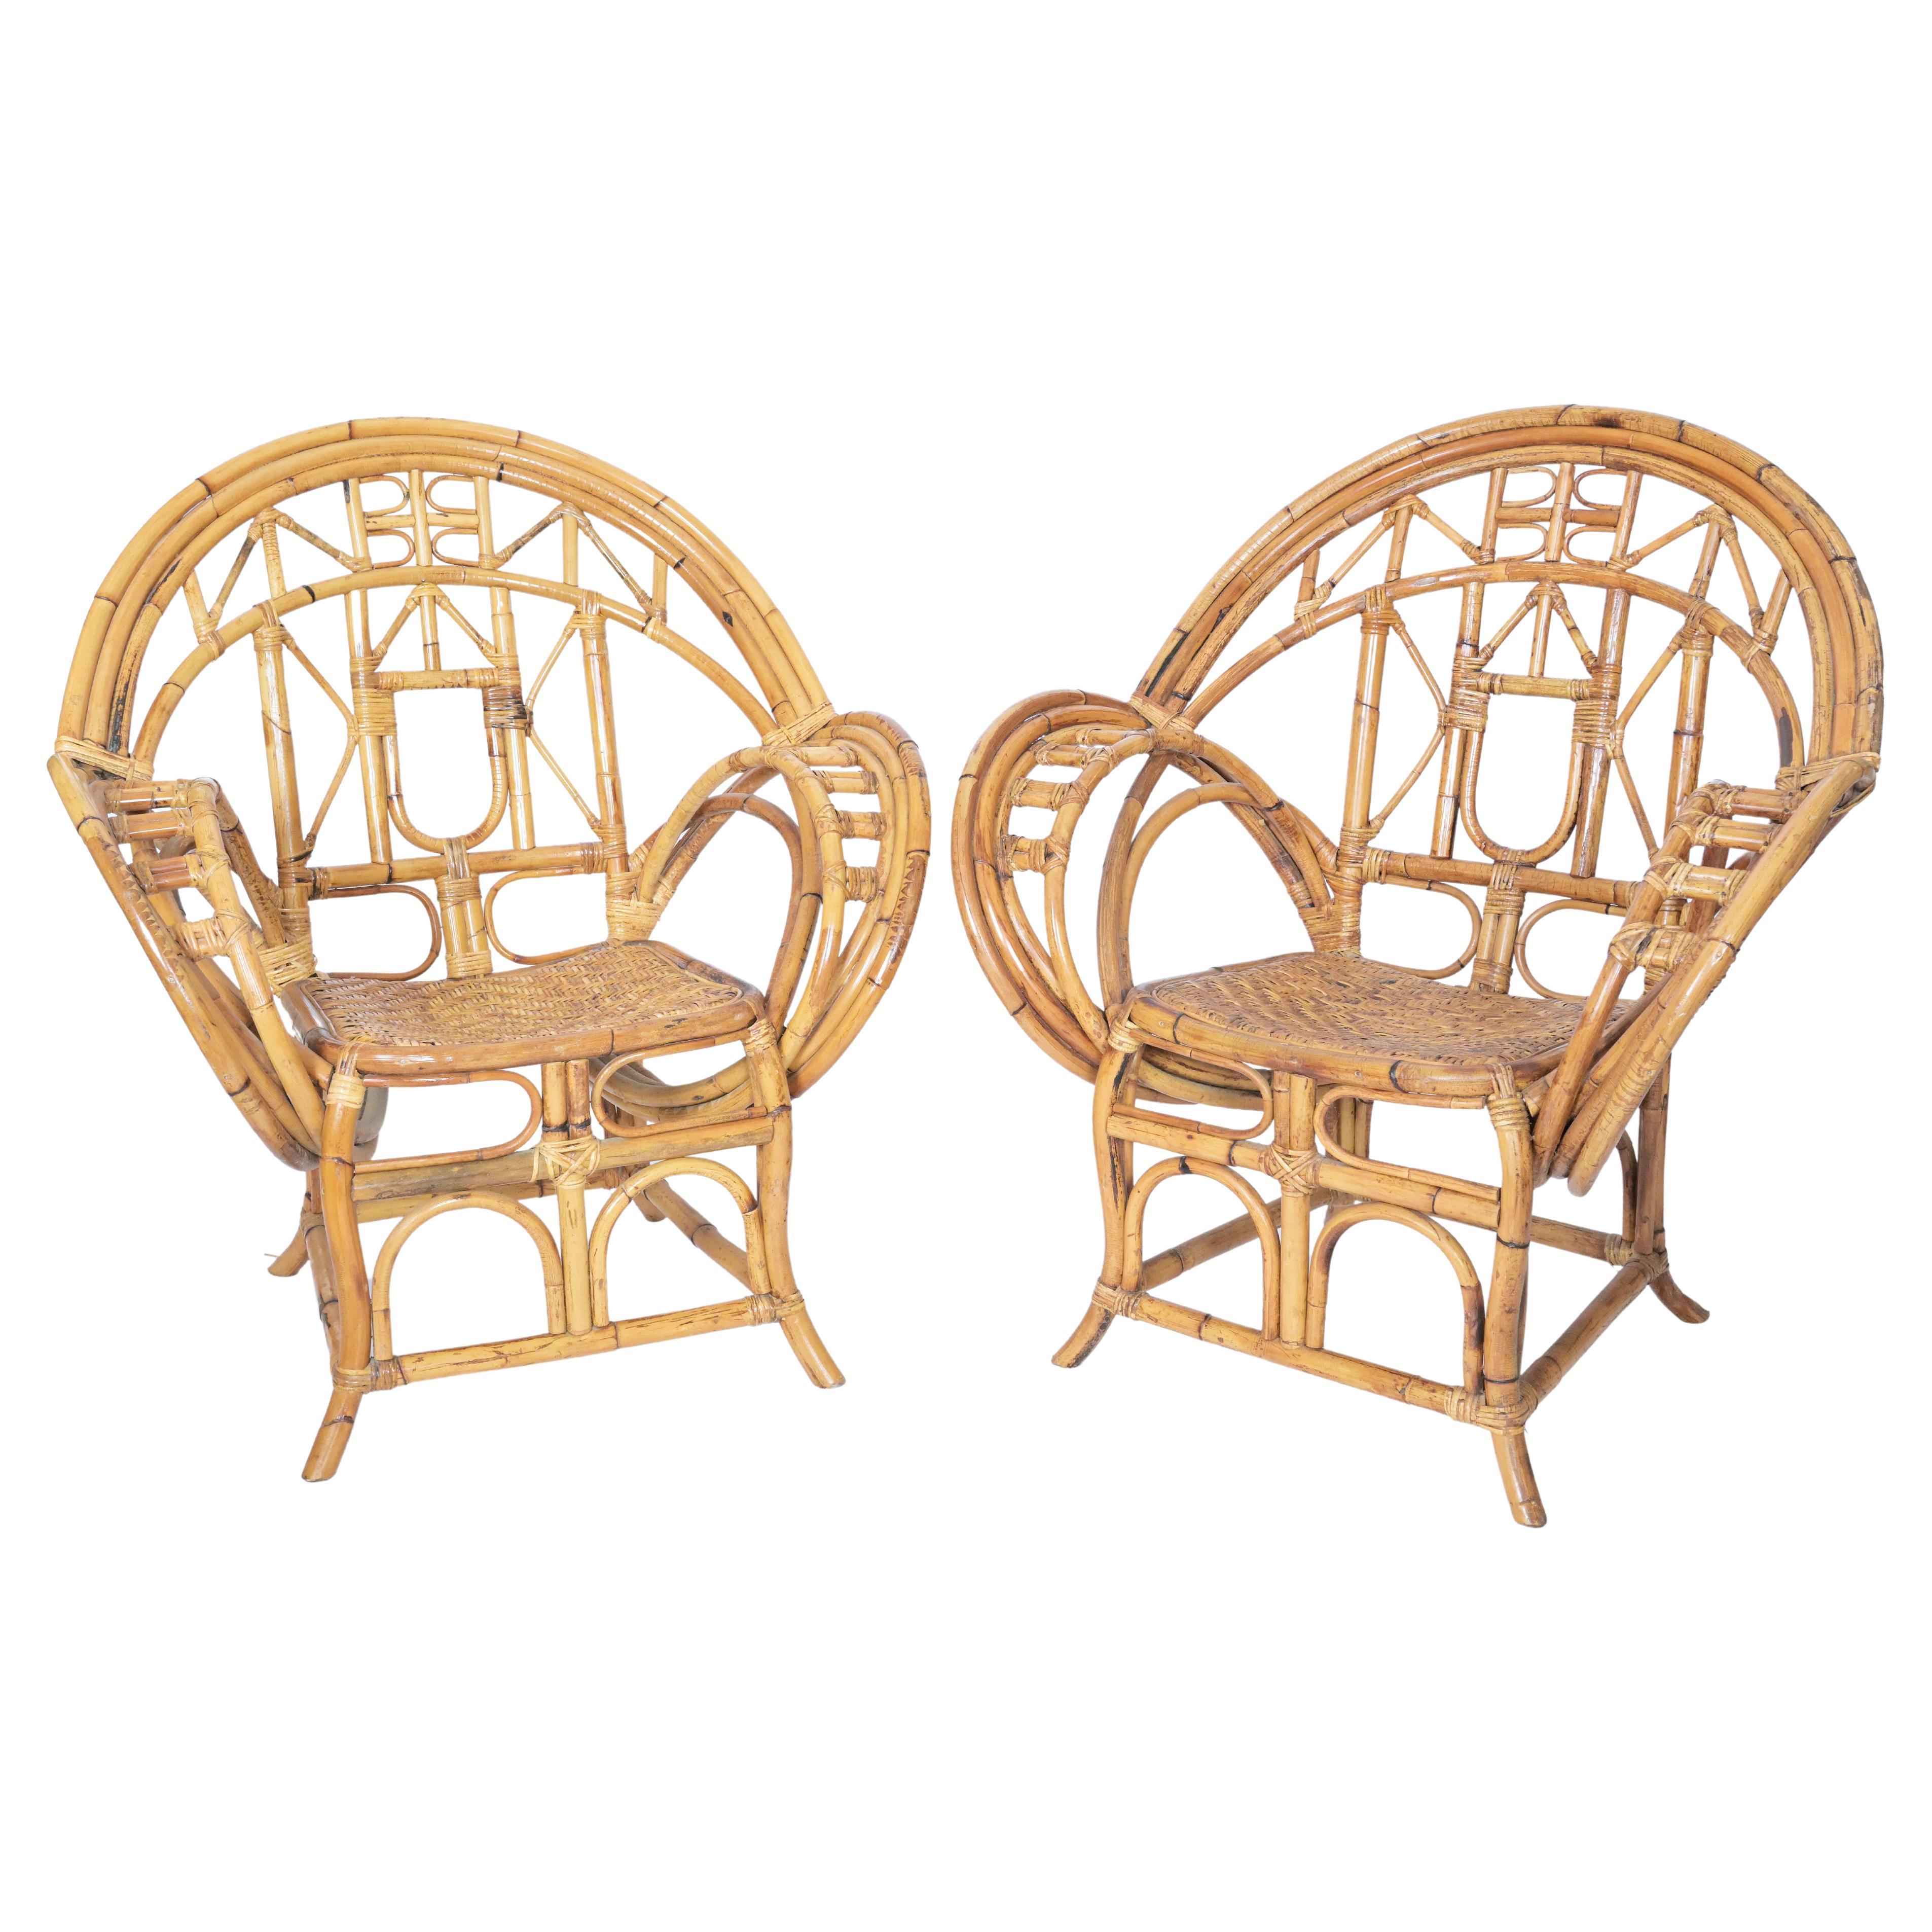 Pair of Mid-Century Modern Bamboo Caned Armchairs For Sale